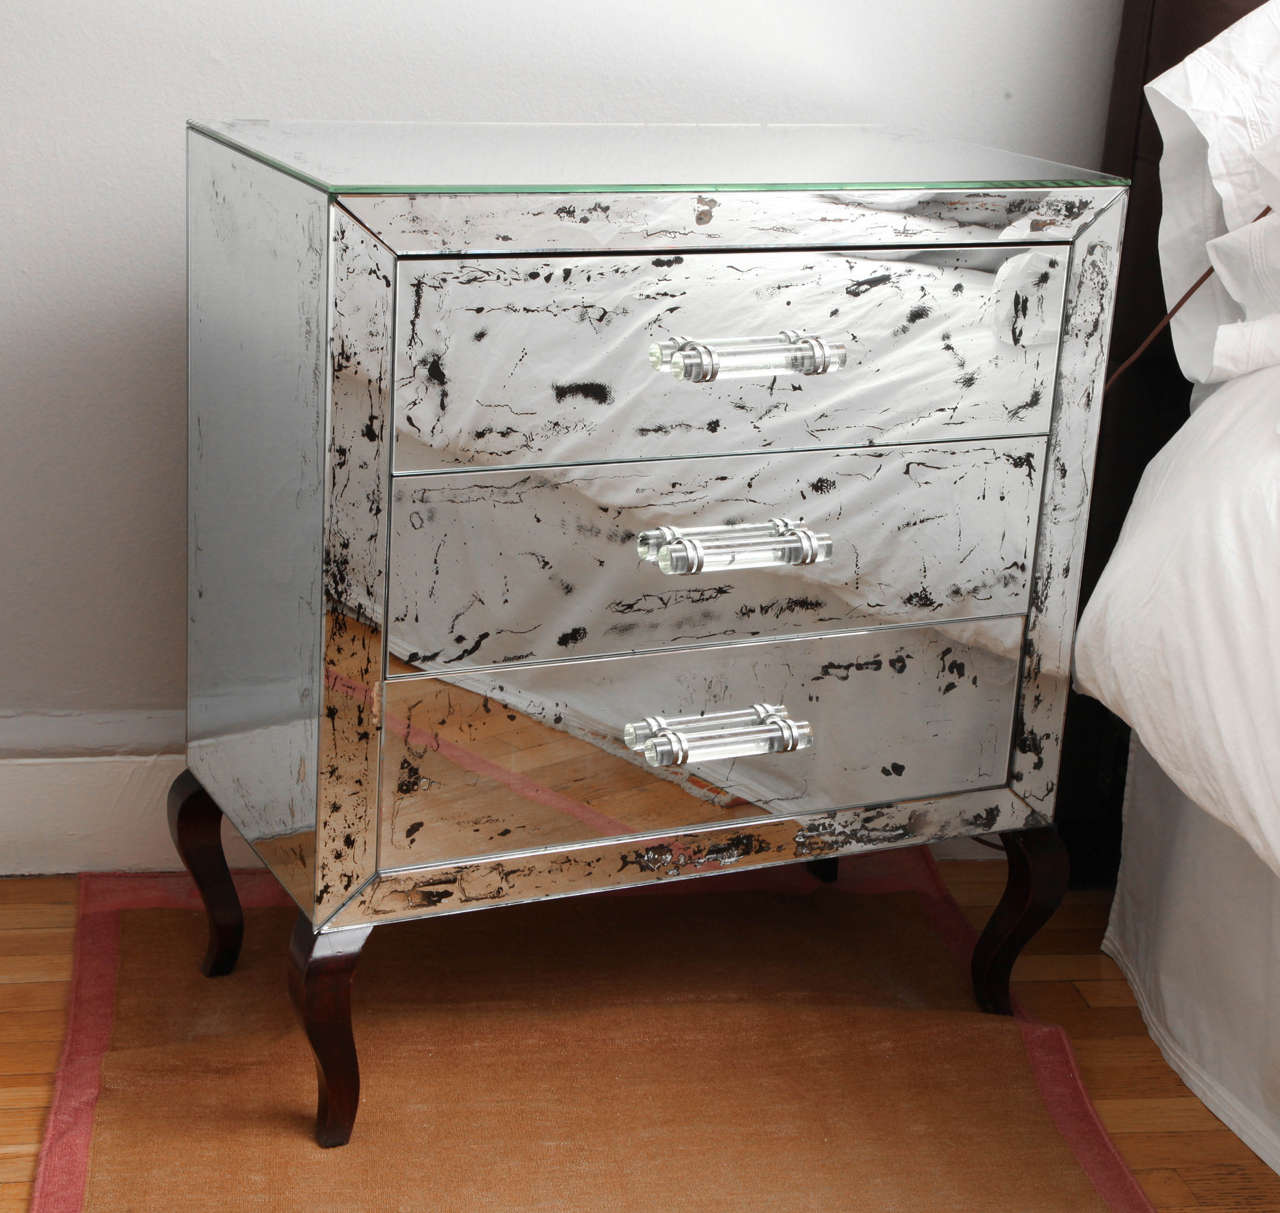 Antique-mirrored three-drawer chest with Lucite handles, glass top and wood Cabriole legs, c. 1940s. Purchased from Venfield, New York City.